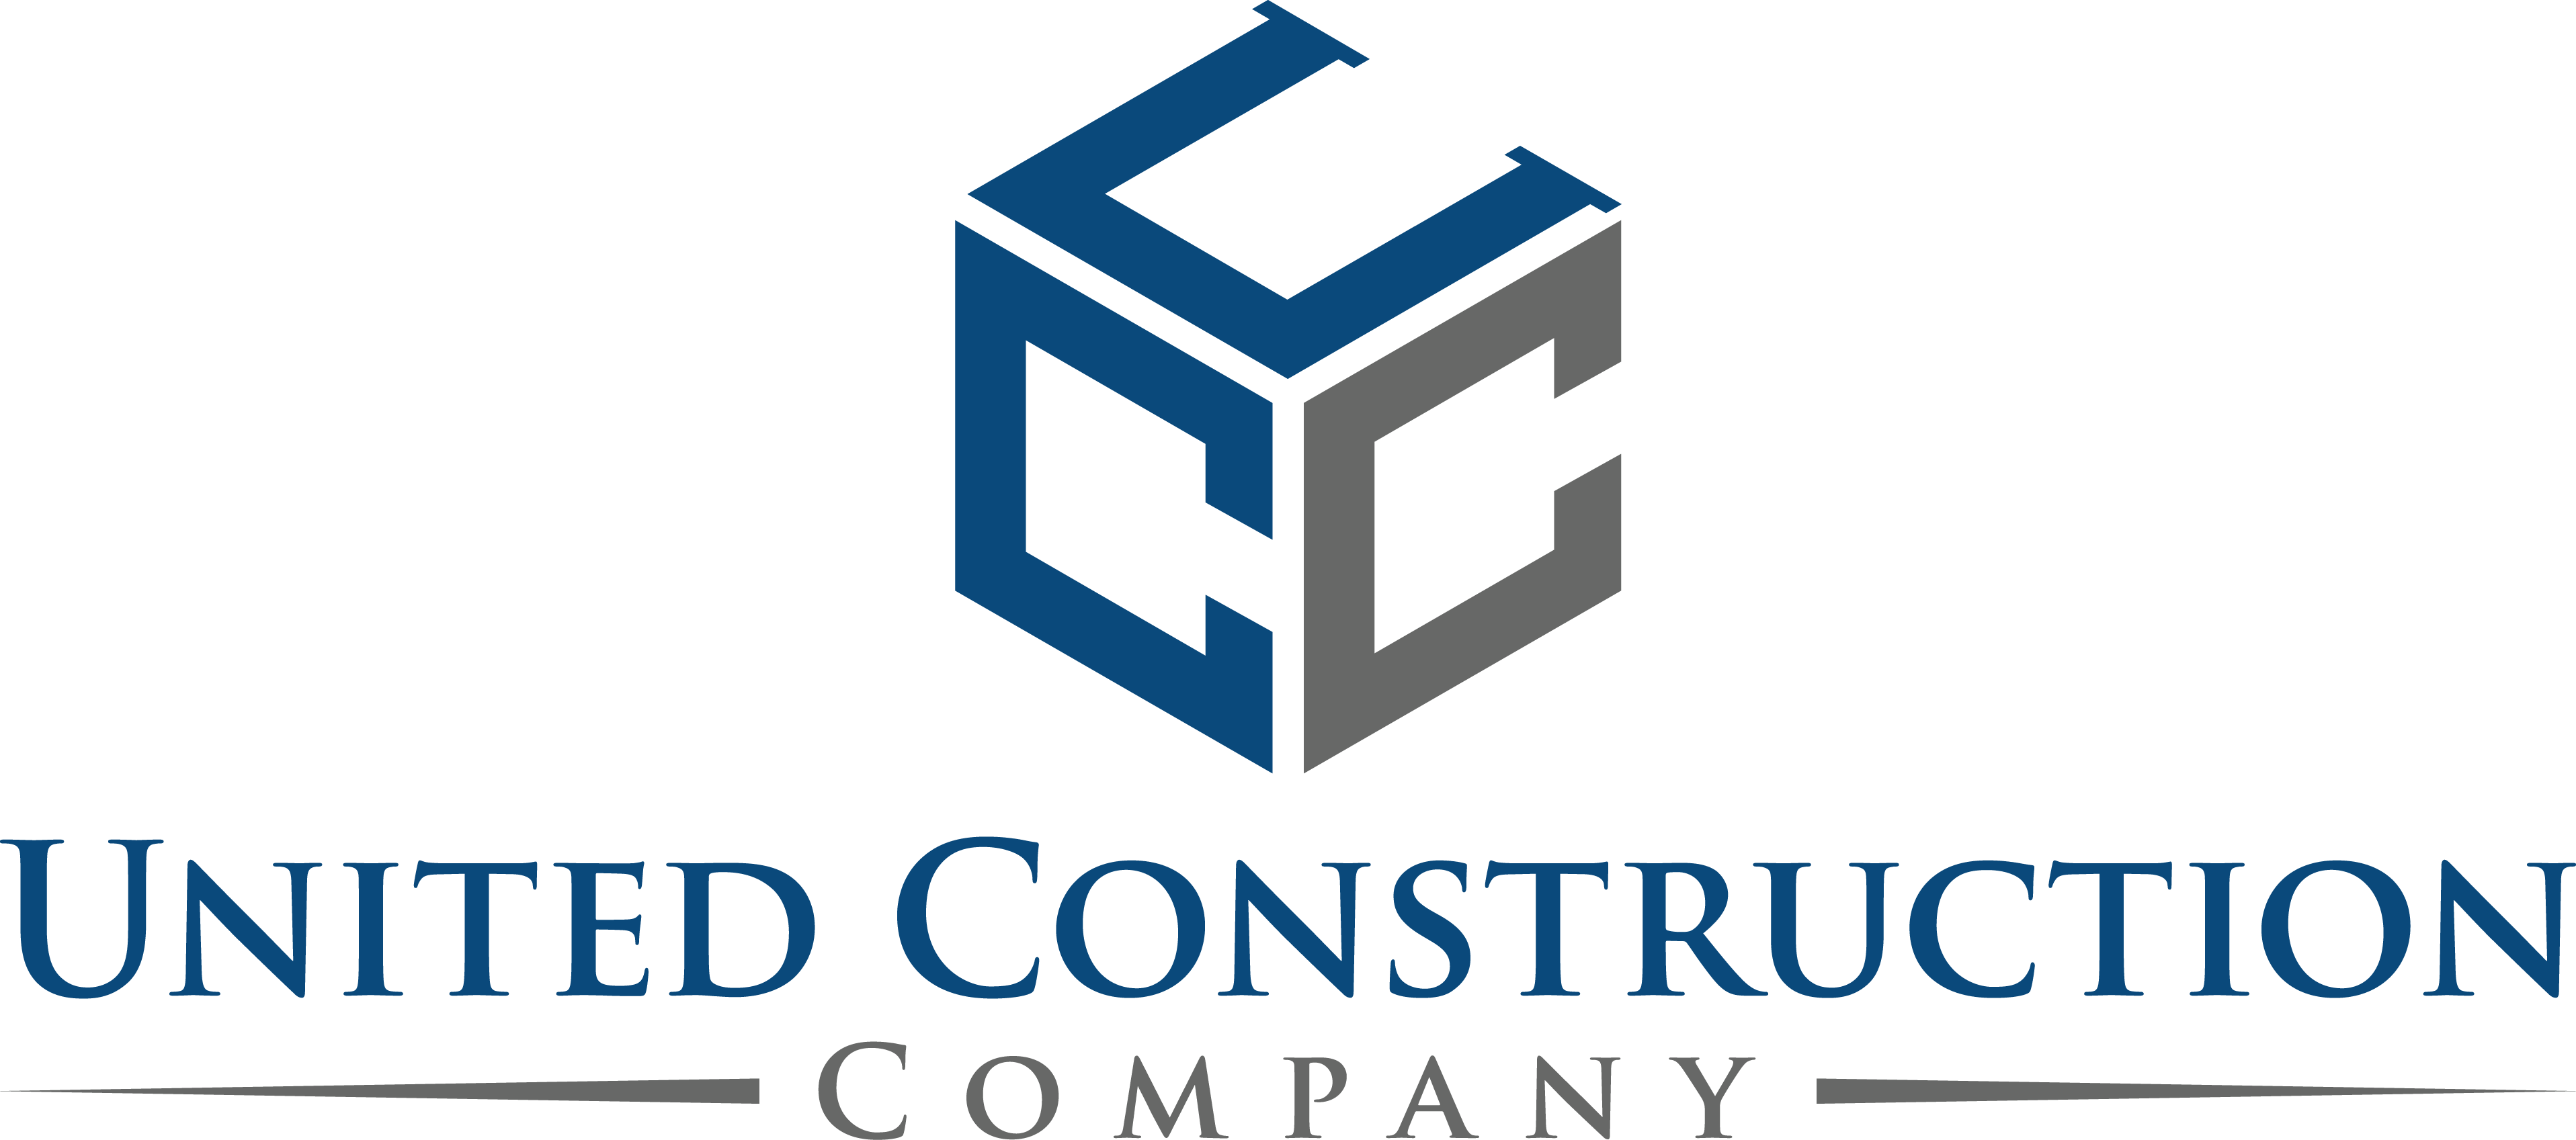 United Construction Company Is A Leader In New Construction - Graphic Design (3833x1697)